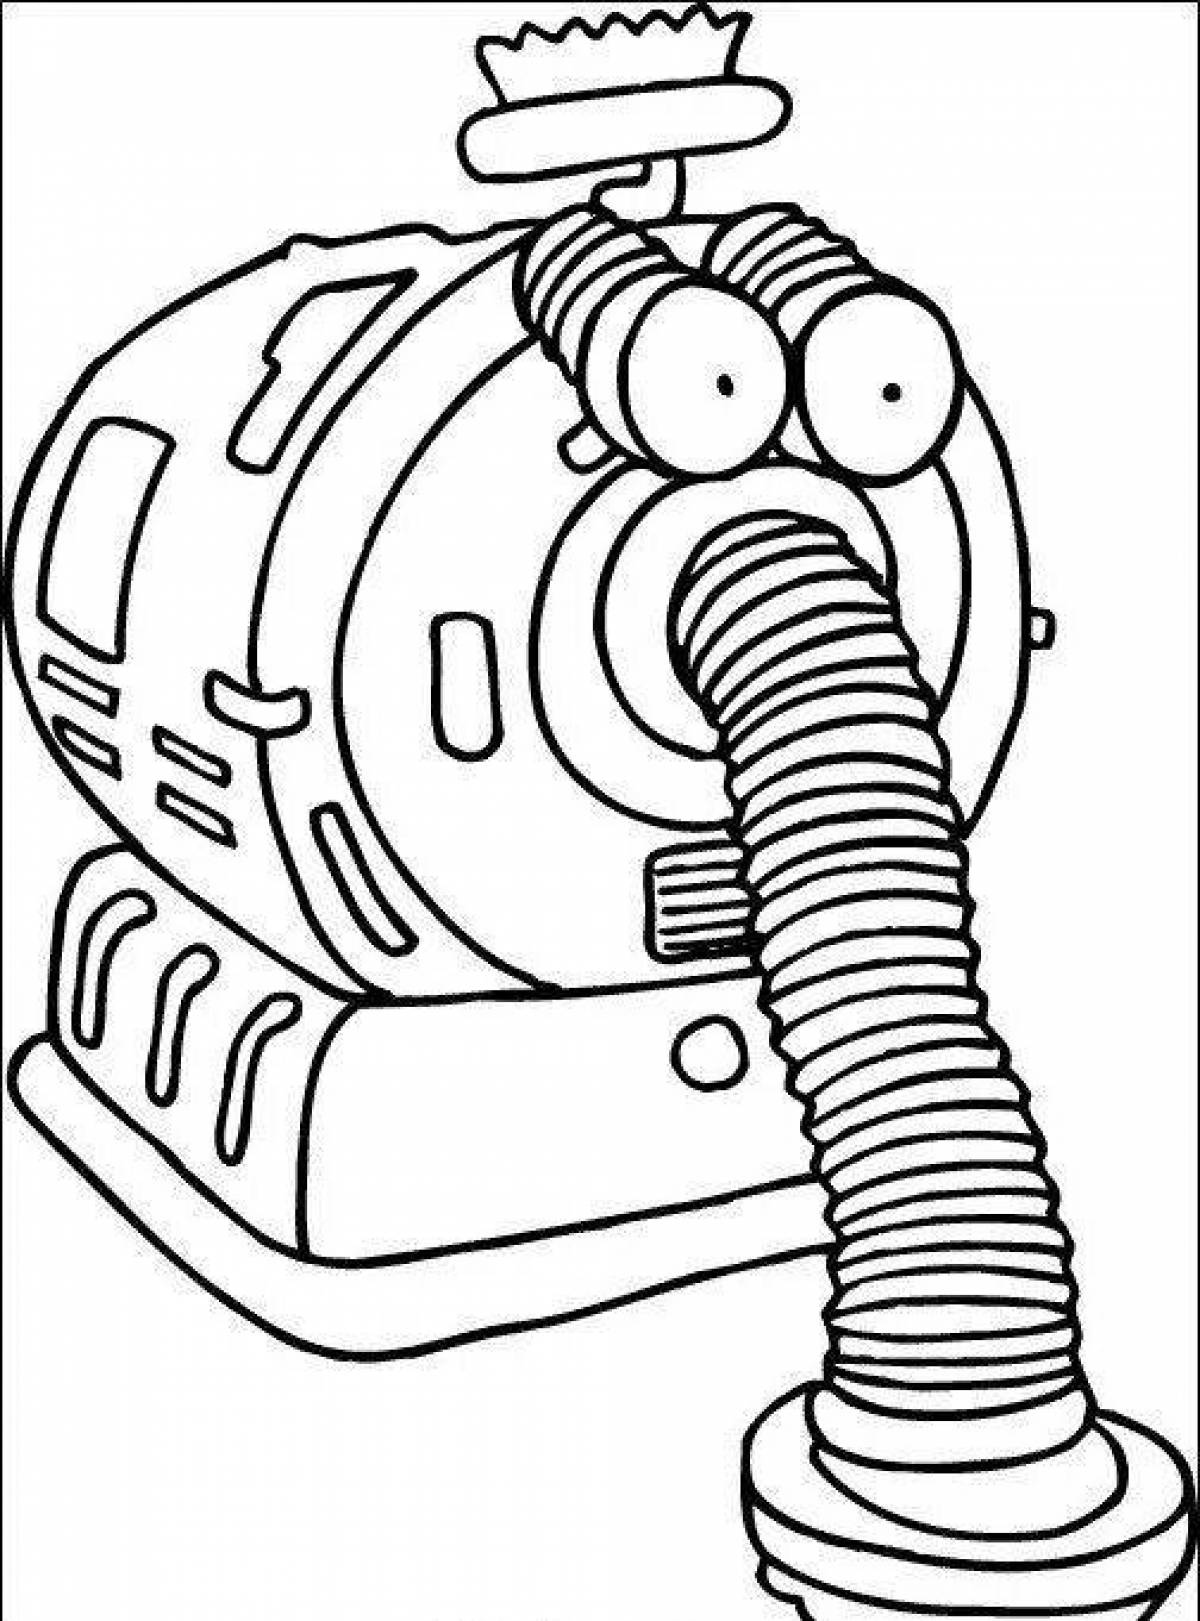 Intriguing robot vacuum cleaner coloring book